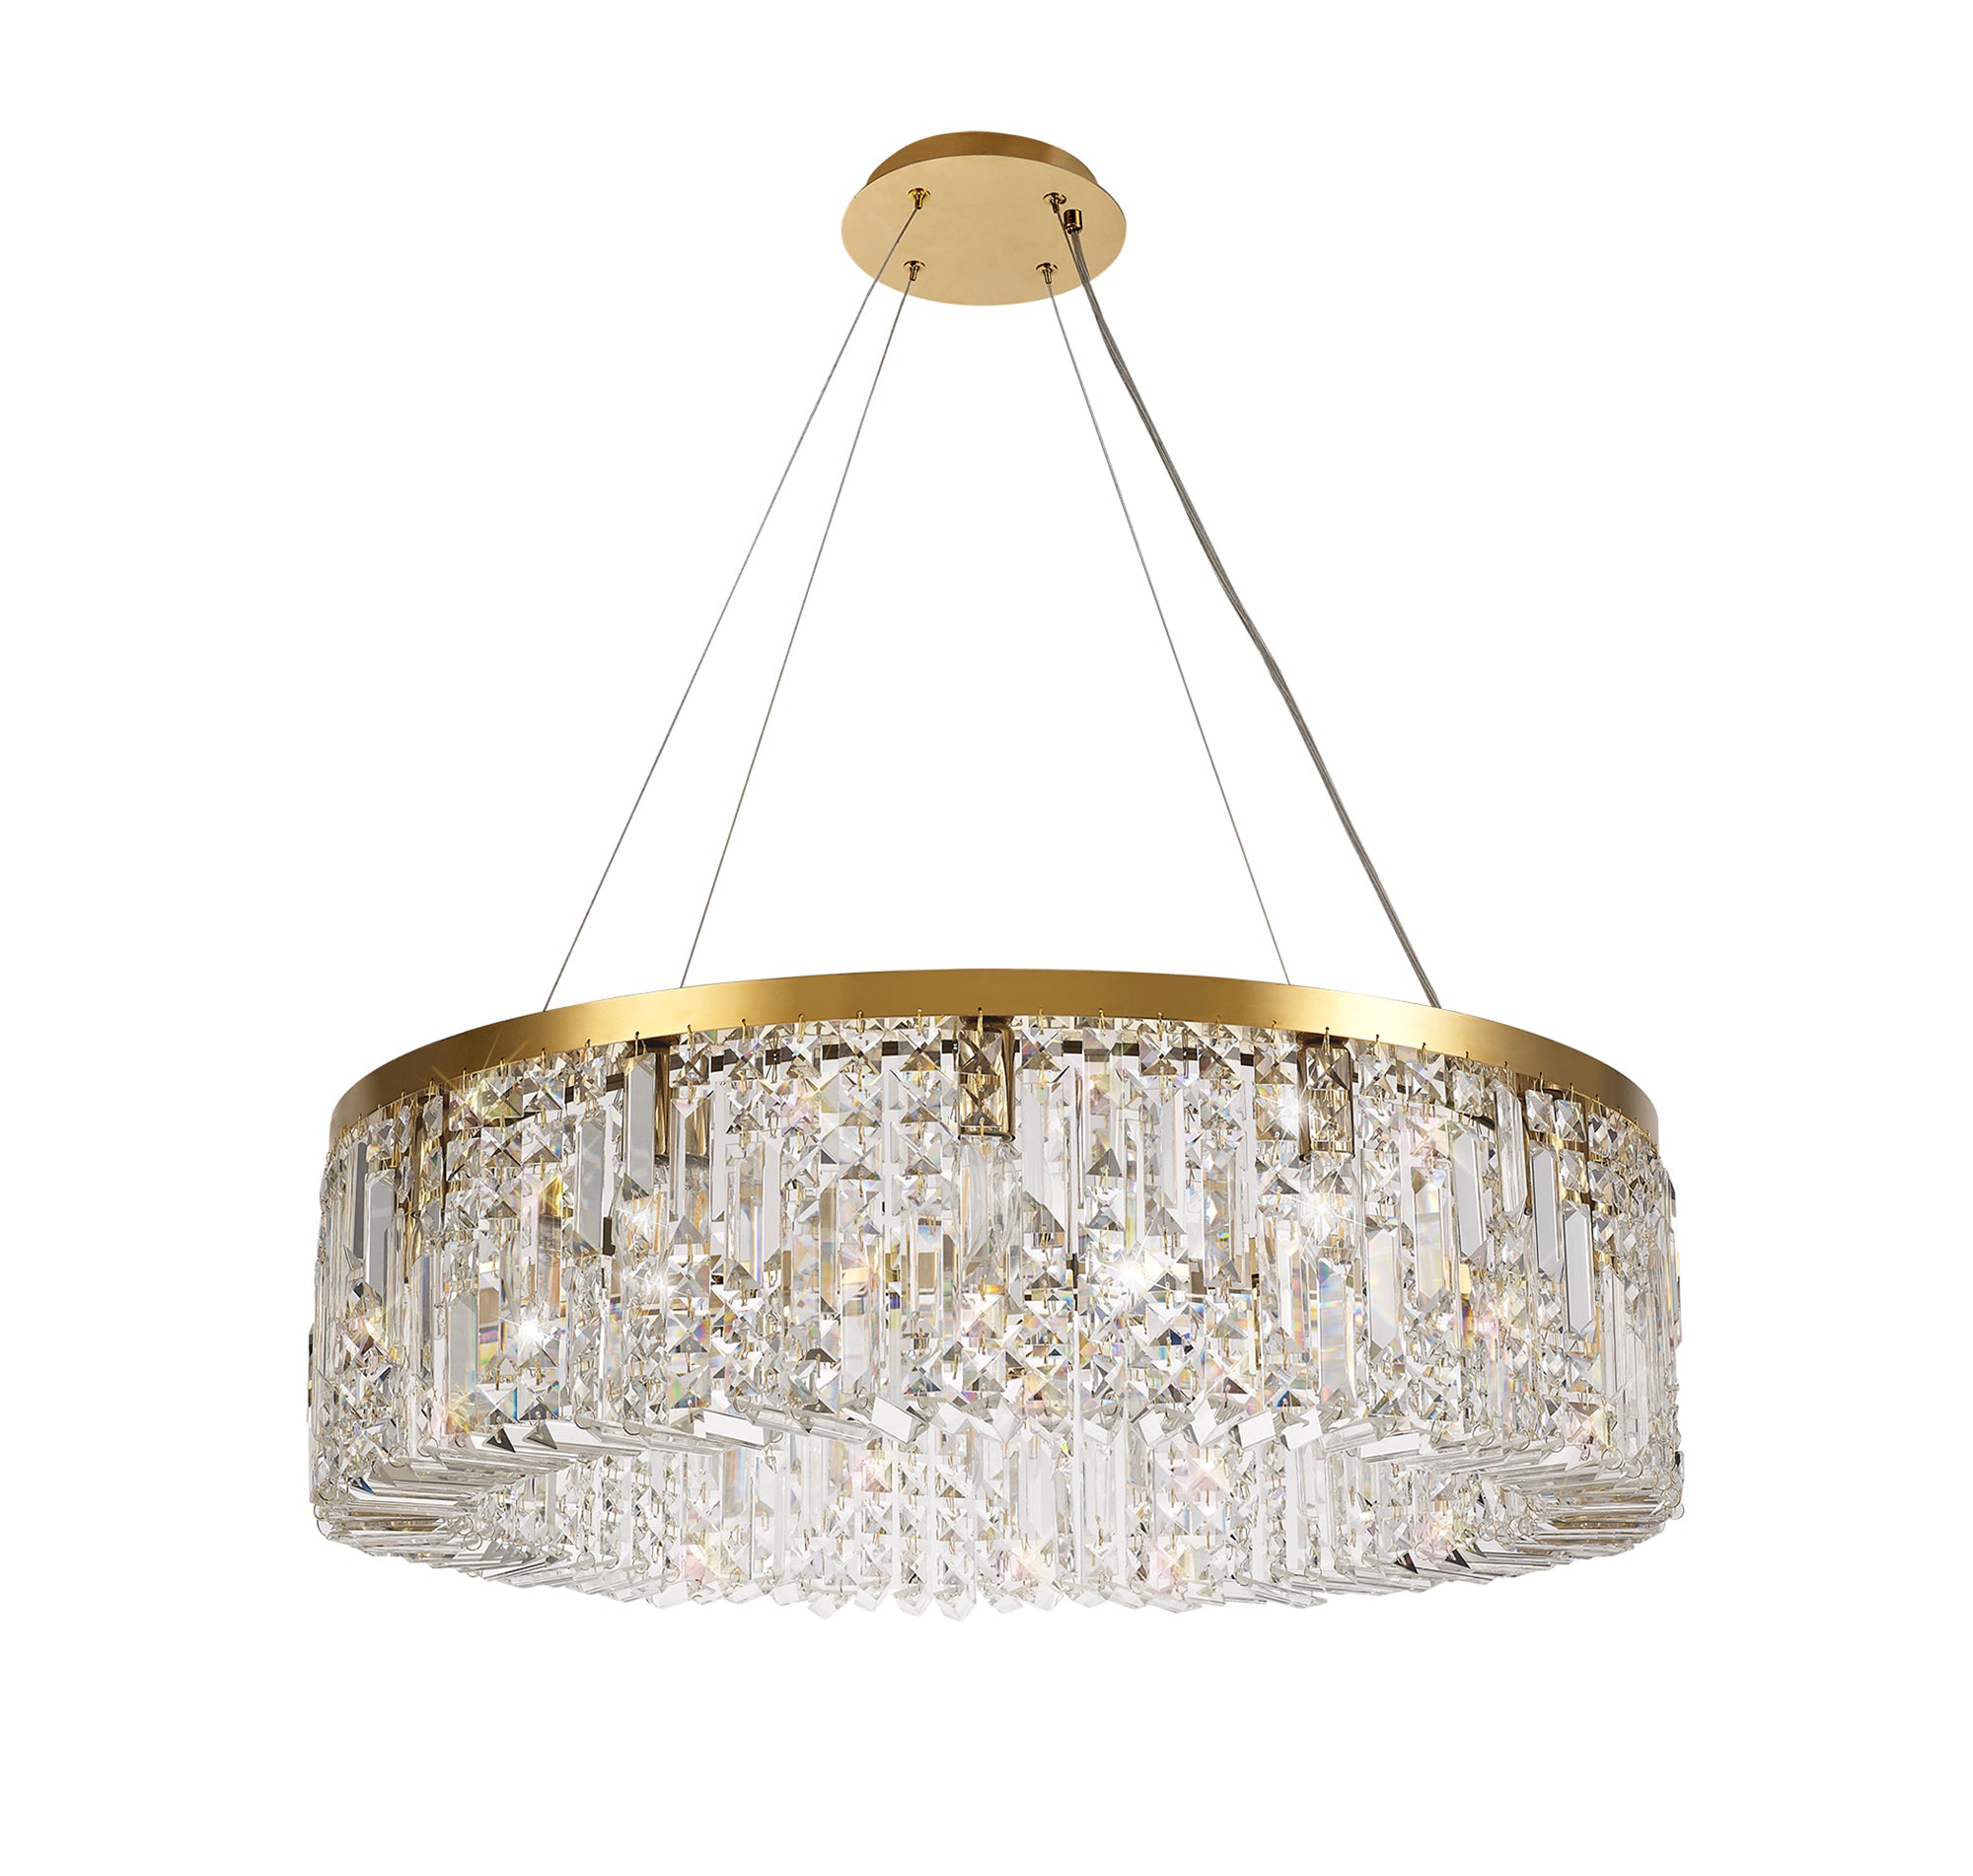 Mayfair 80cm Round Pendant Chandelier, 12 Light E14, Gold/Crystal Item Weight: 16.8kg - LO178173